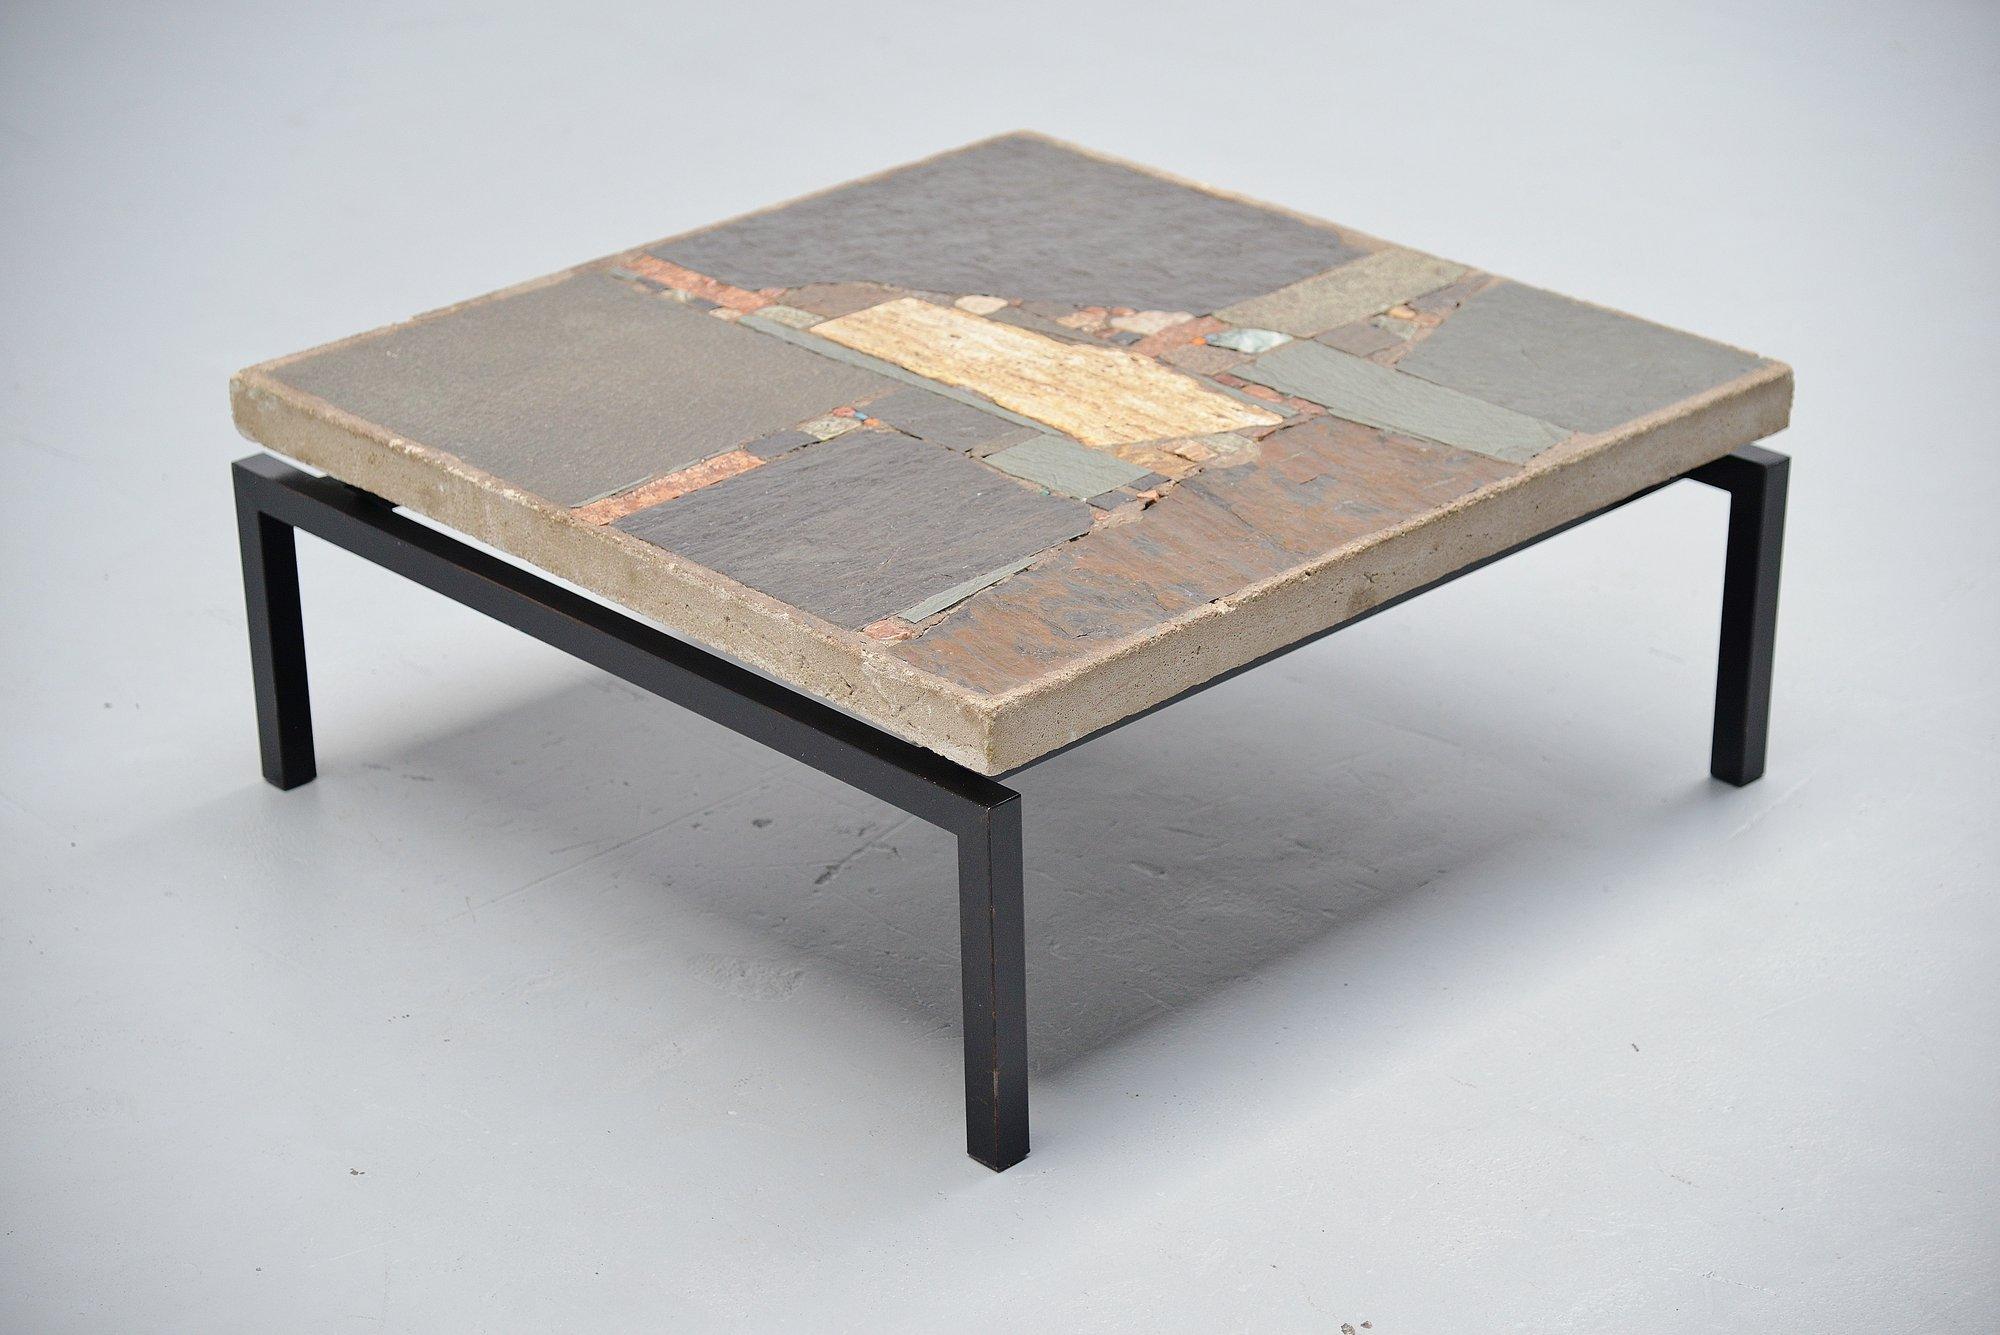 abstract art coffee table